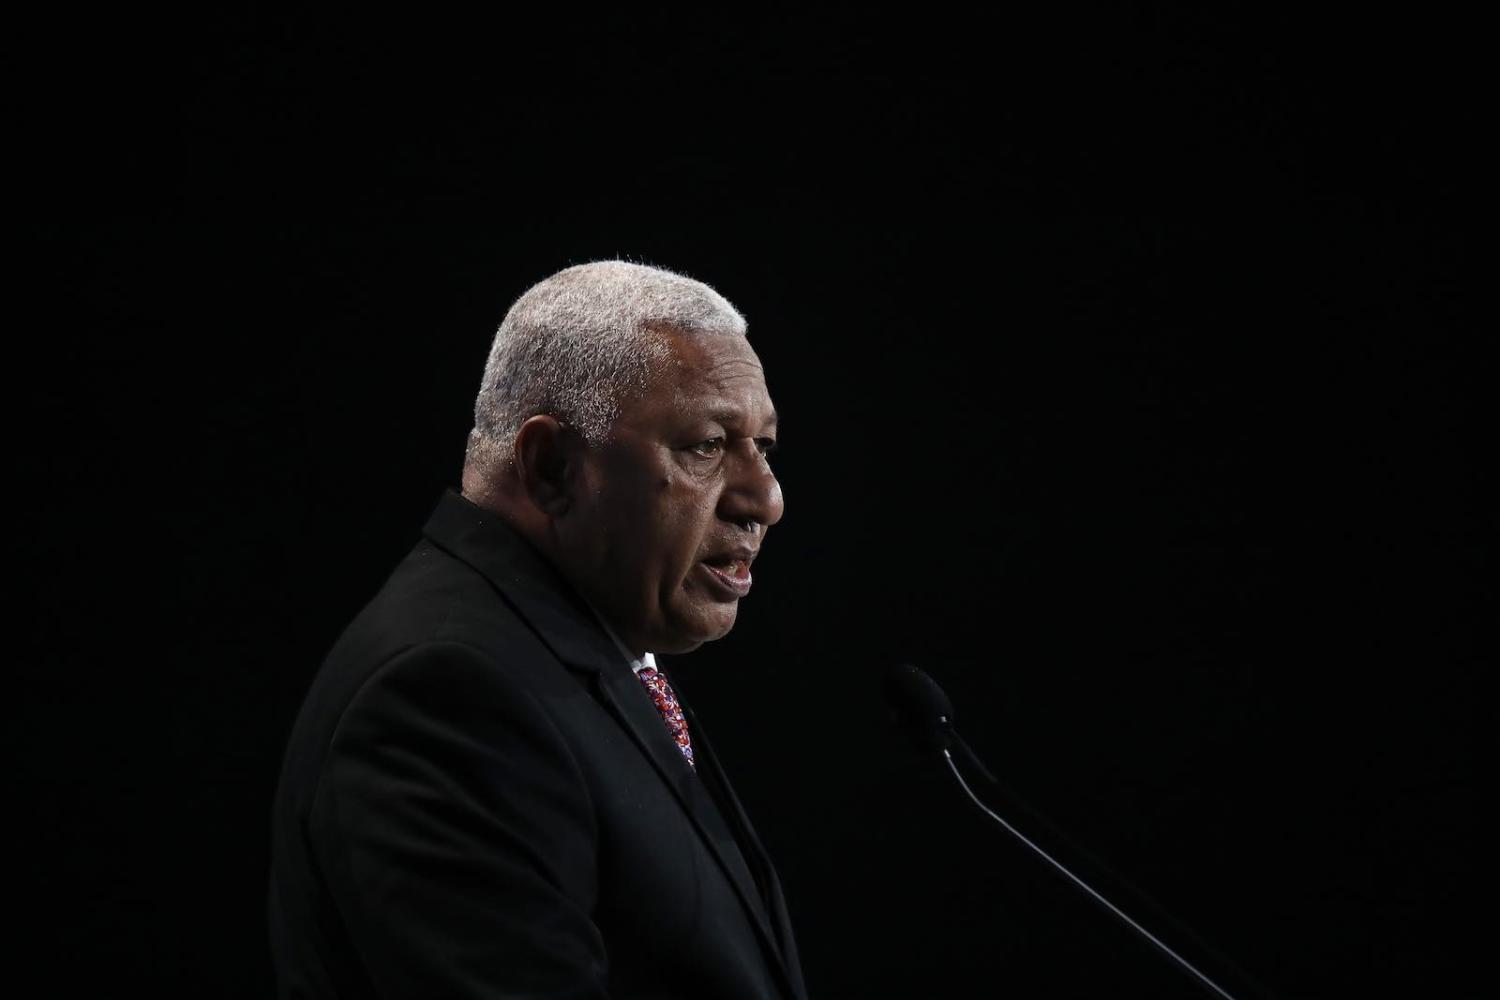 Frank Bainimarama has returned after boycotting the Pacific Islands Forum for the past 12 years (Photo: Sean Gallup/Getty)